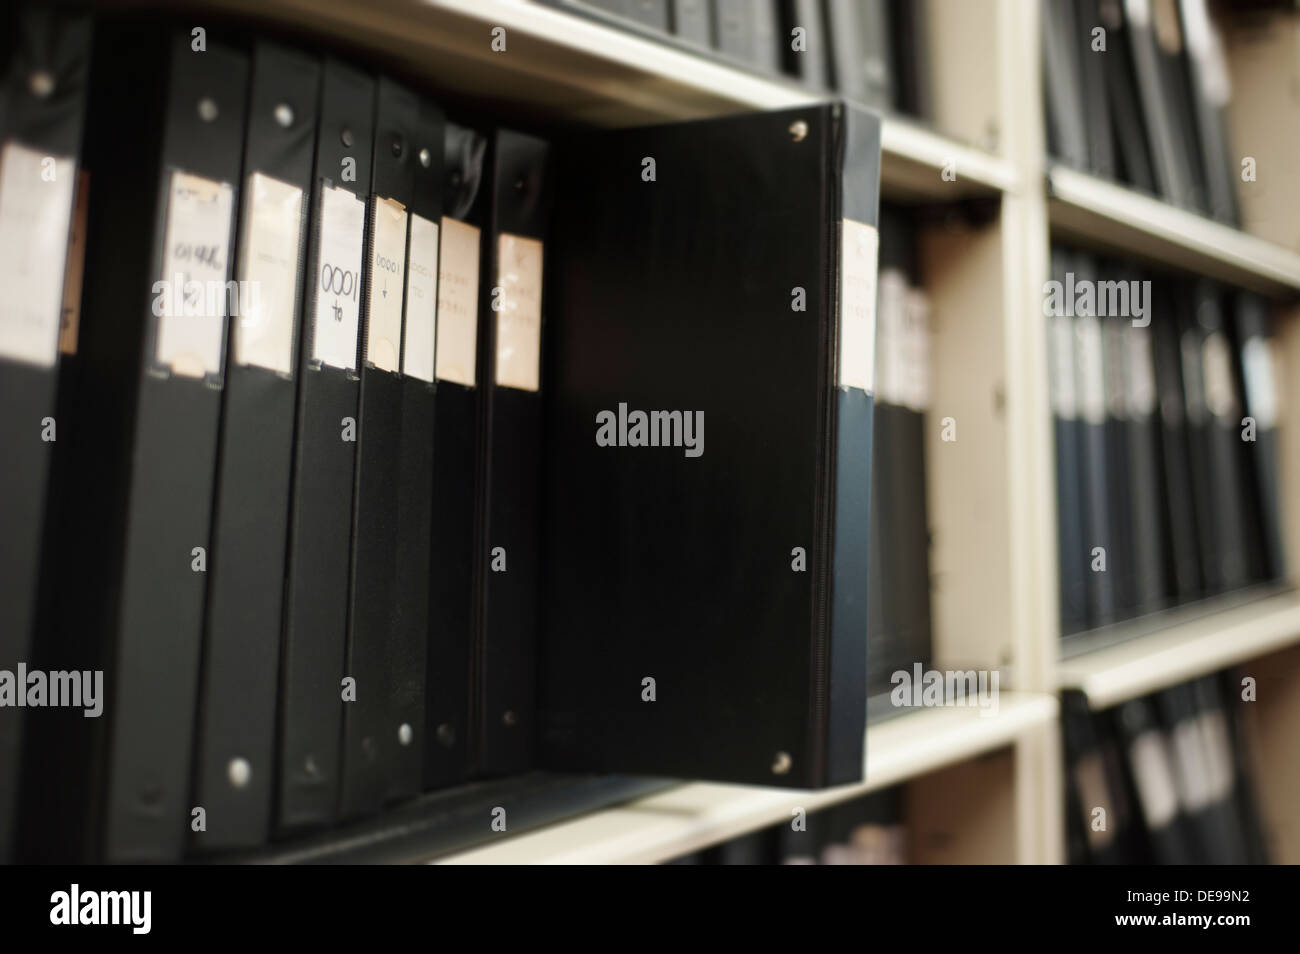 Old analogue binders for record-keeping on a bookshelf Stock Photo